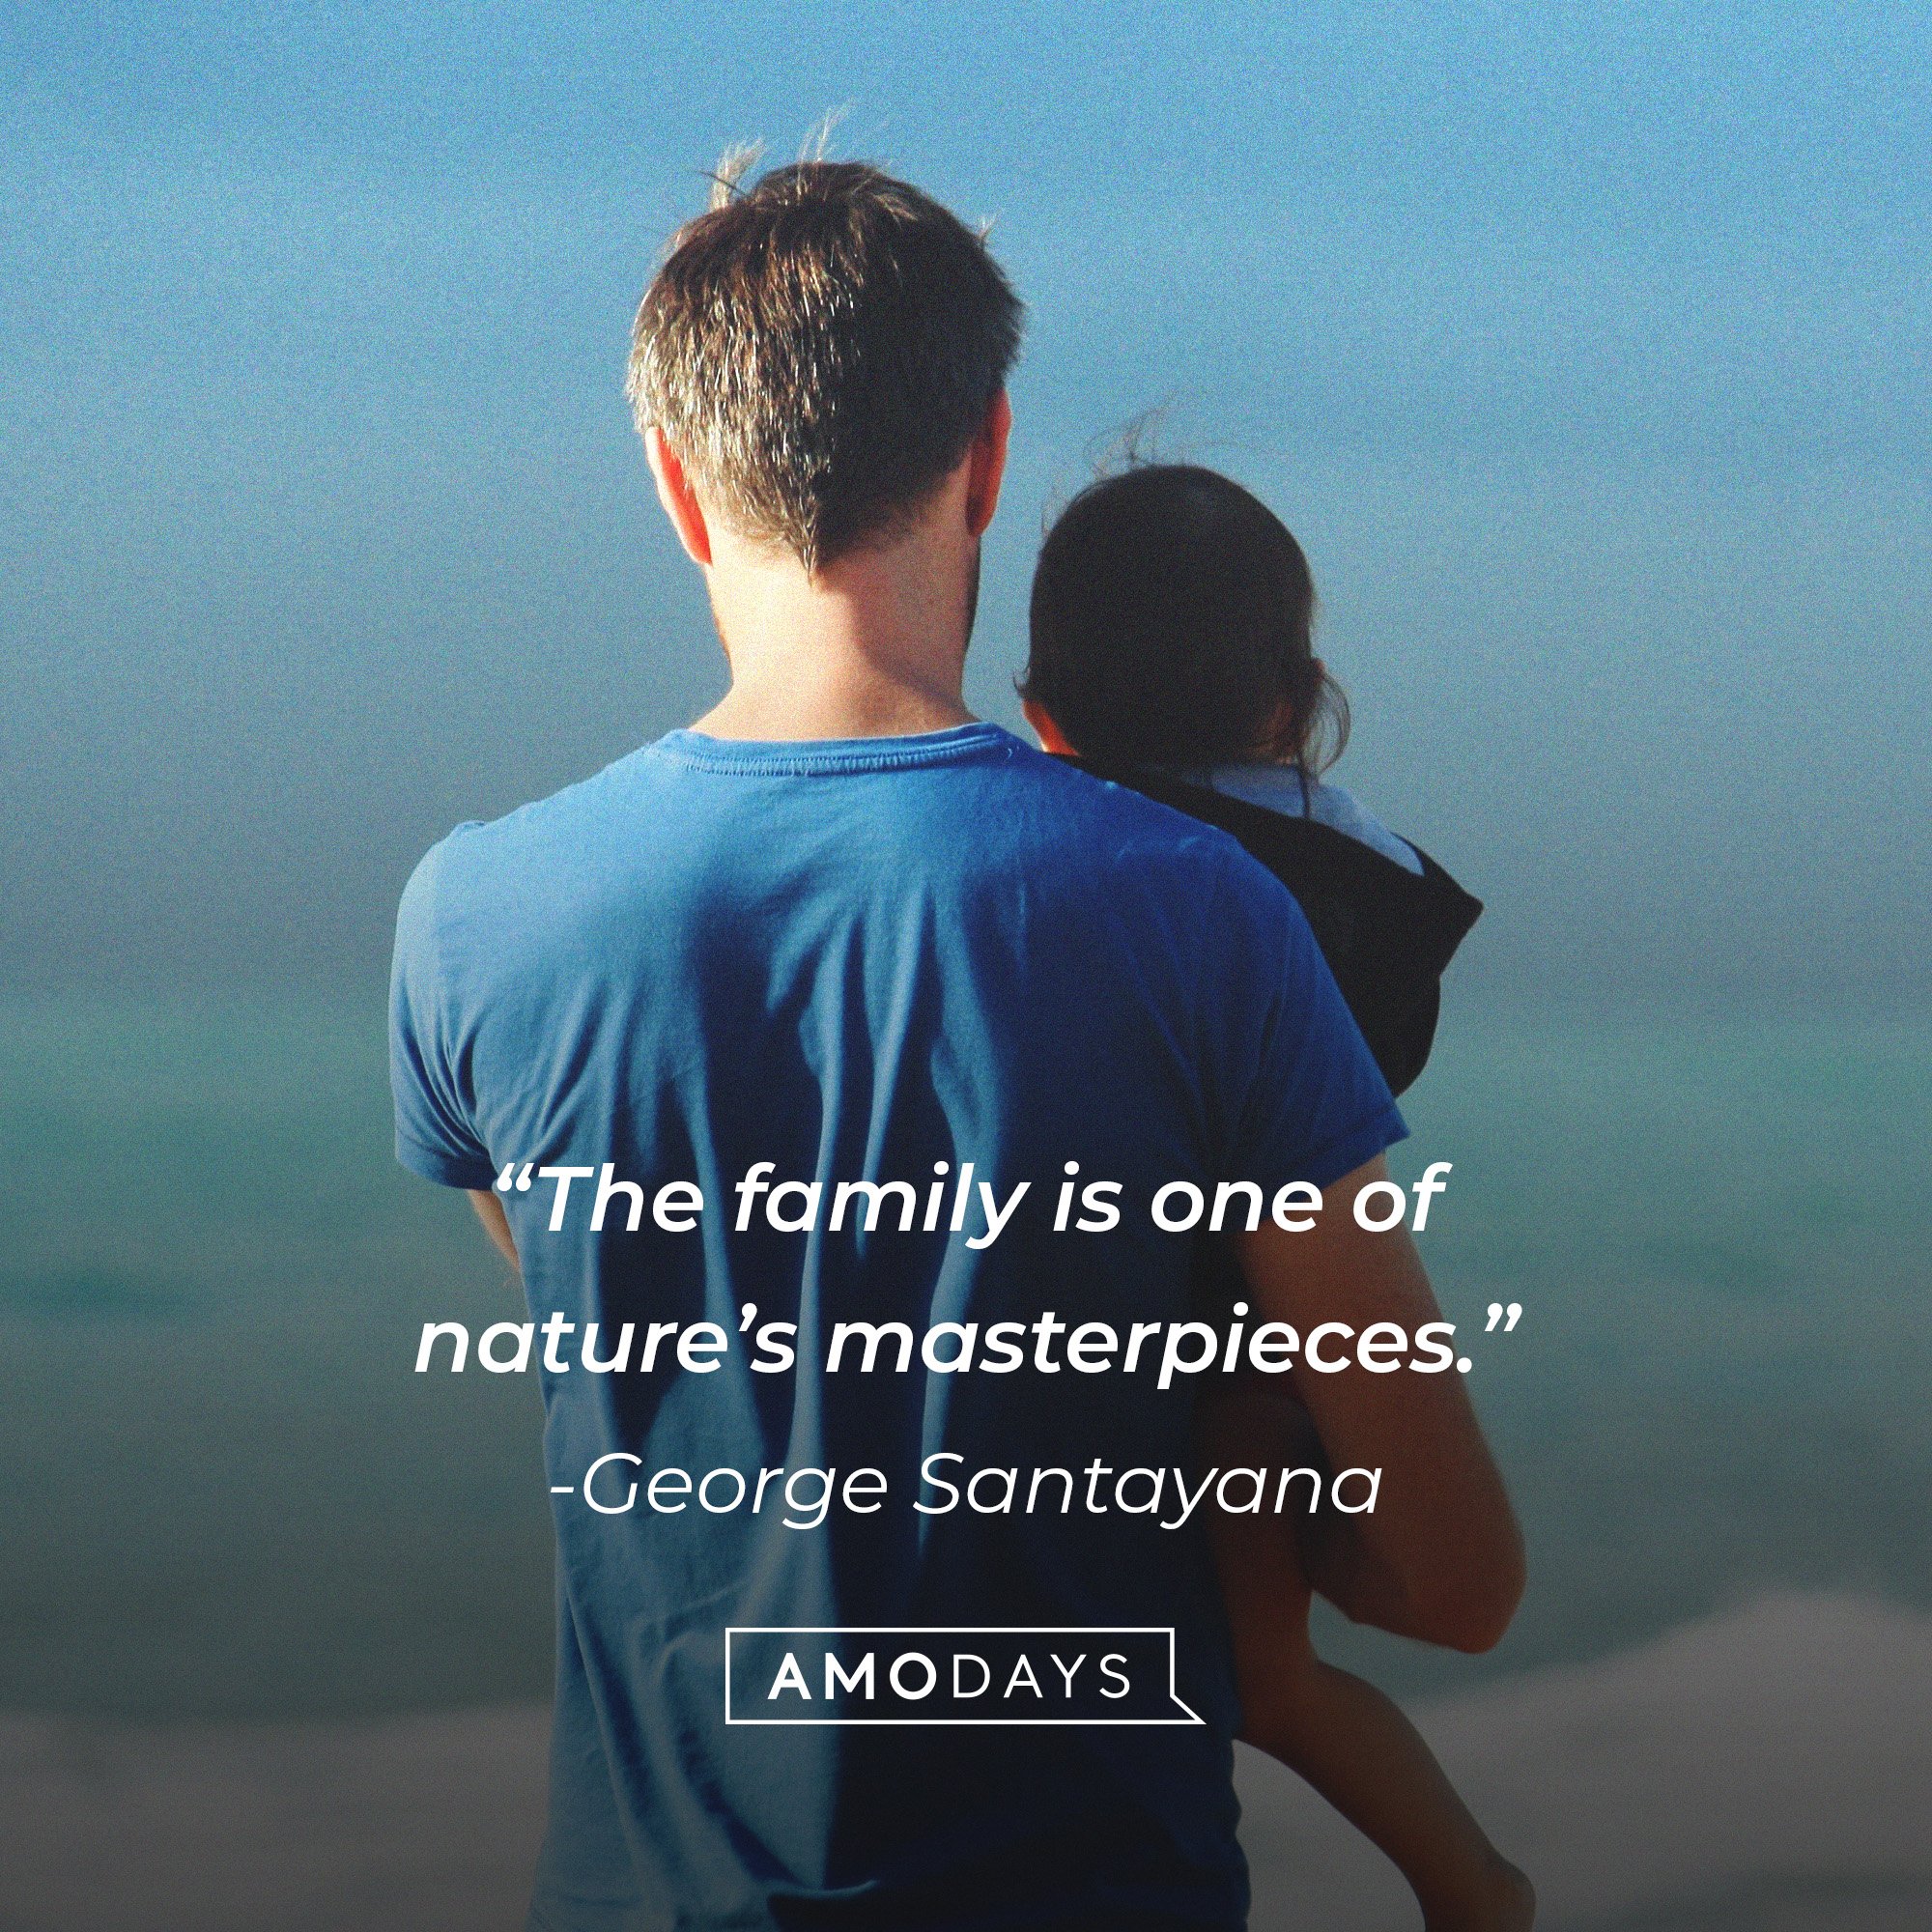 George Santayana's quote: “The family is one of nature’s masterpieces.” | Image: AmoDays